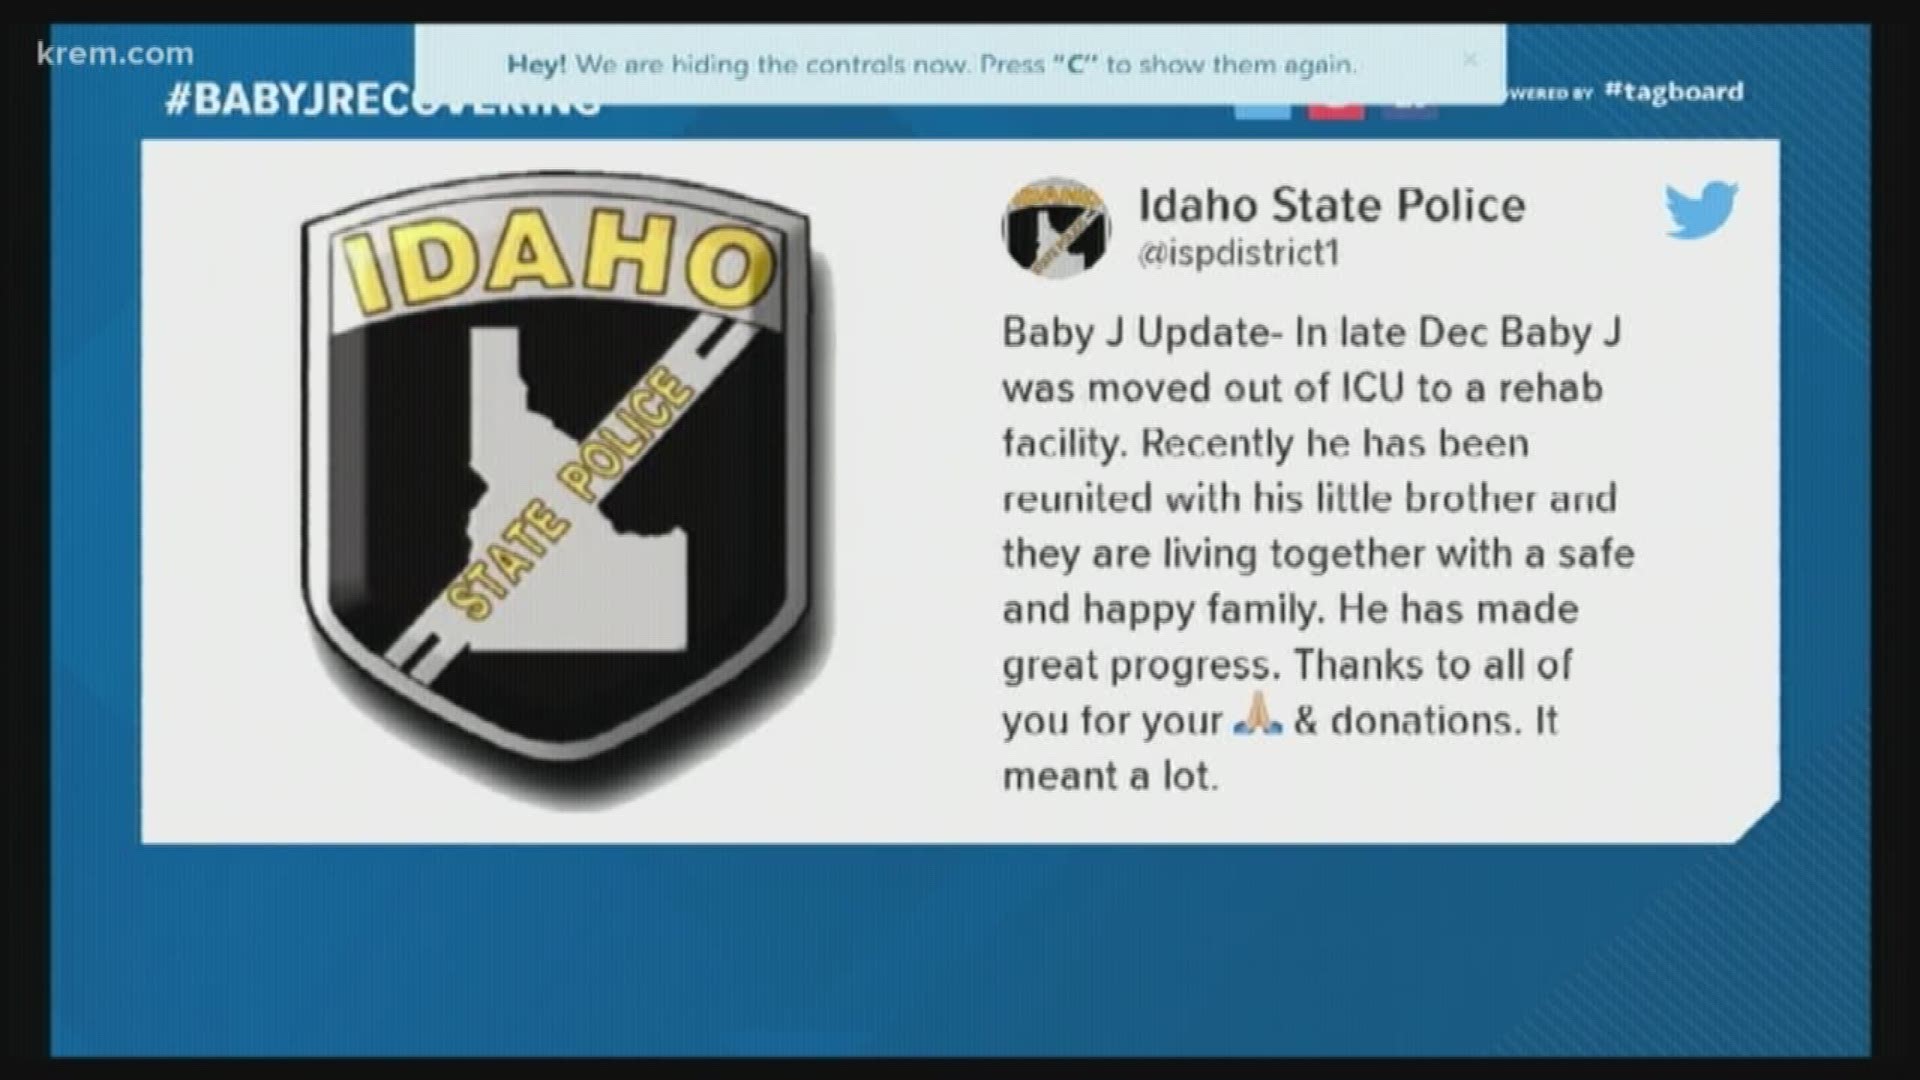 Baby J has also been moved out of the ICU to a rehab facility, according to ISP leaders. They said he and his little brother are living together with a safe and happy family.